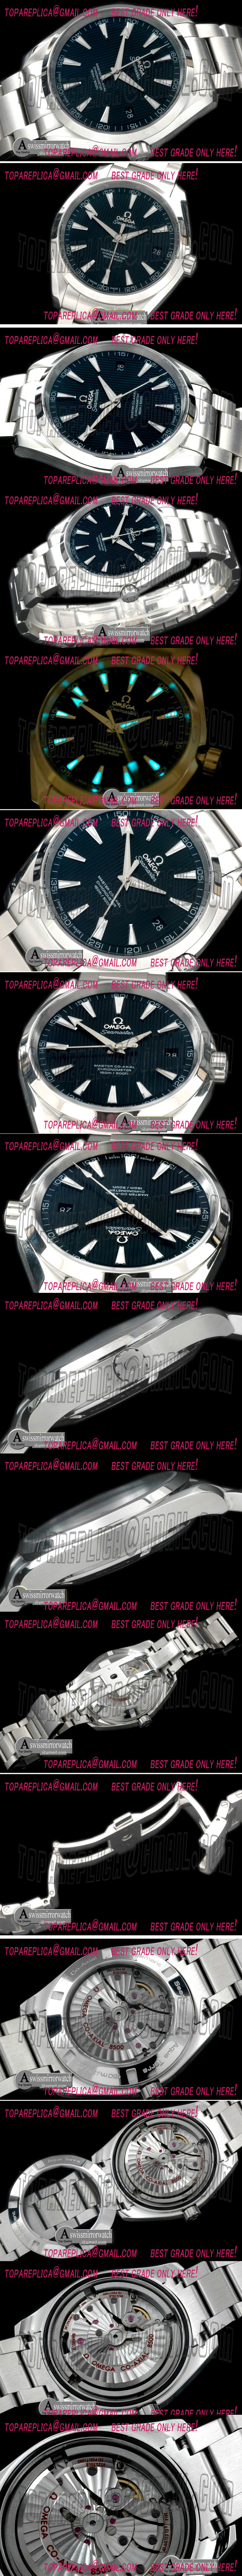 Replica Omega Watches